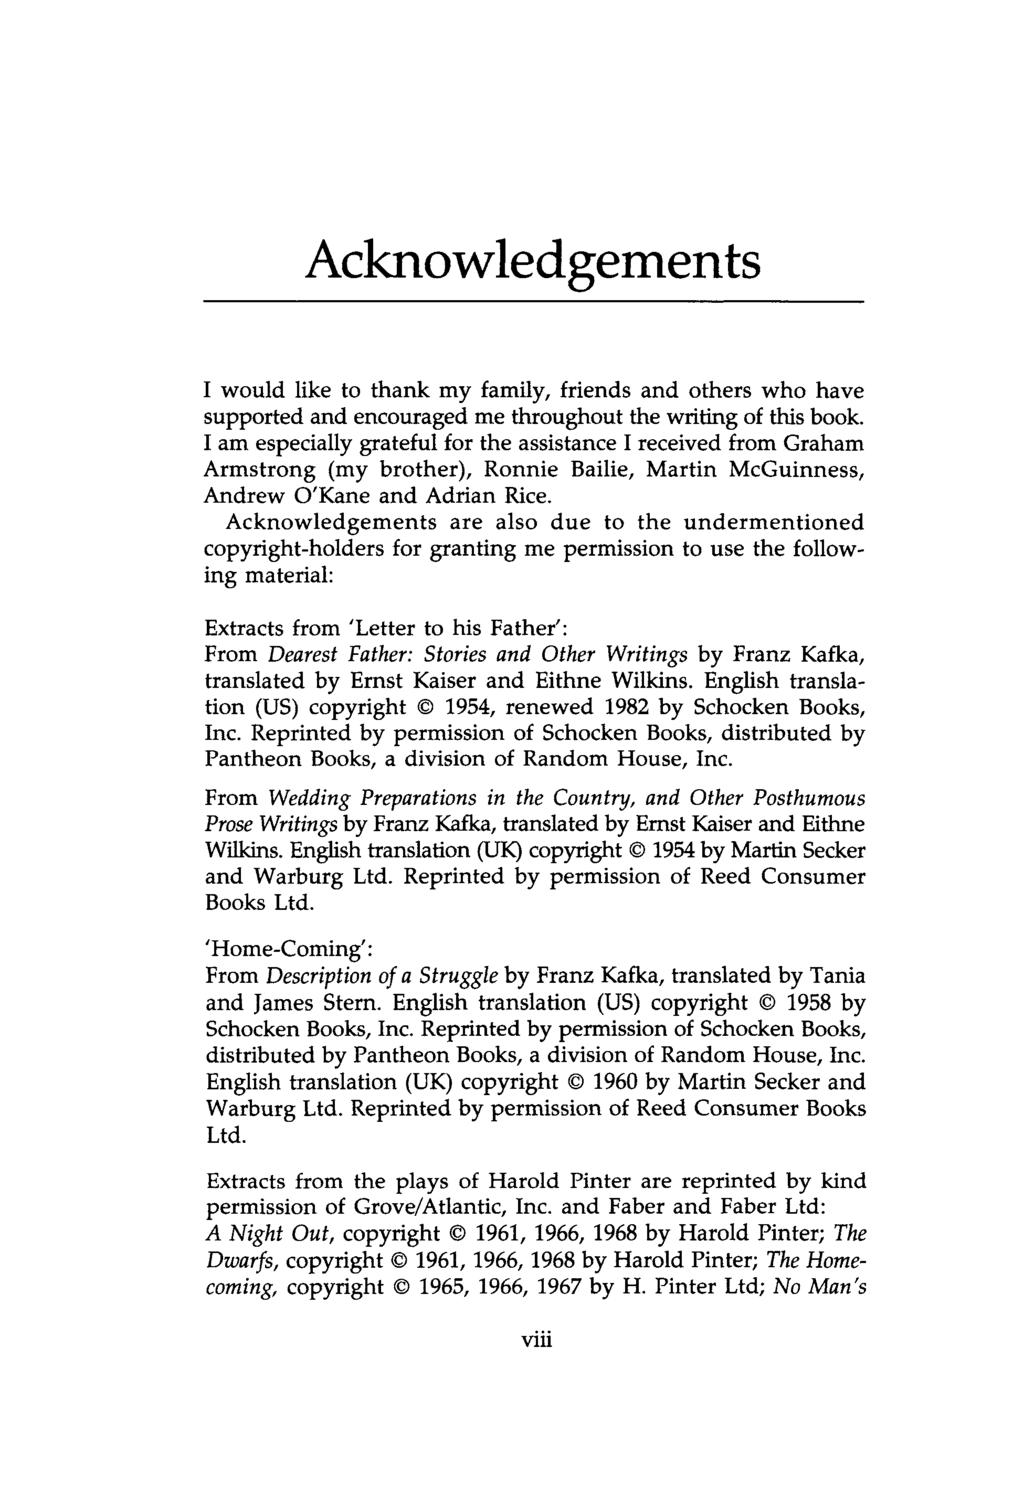 Acknowledgements I would like to thank my family, friends and others who have supported and encouraged me throughout the writing of this book.